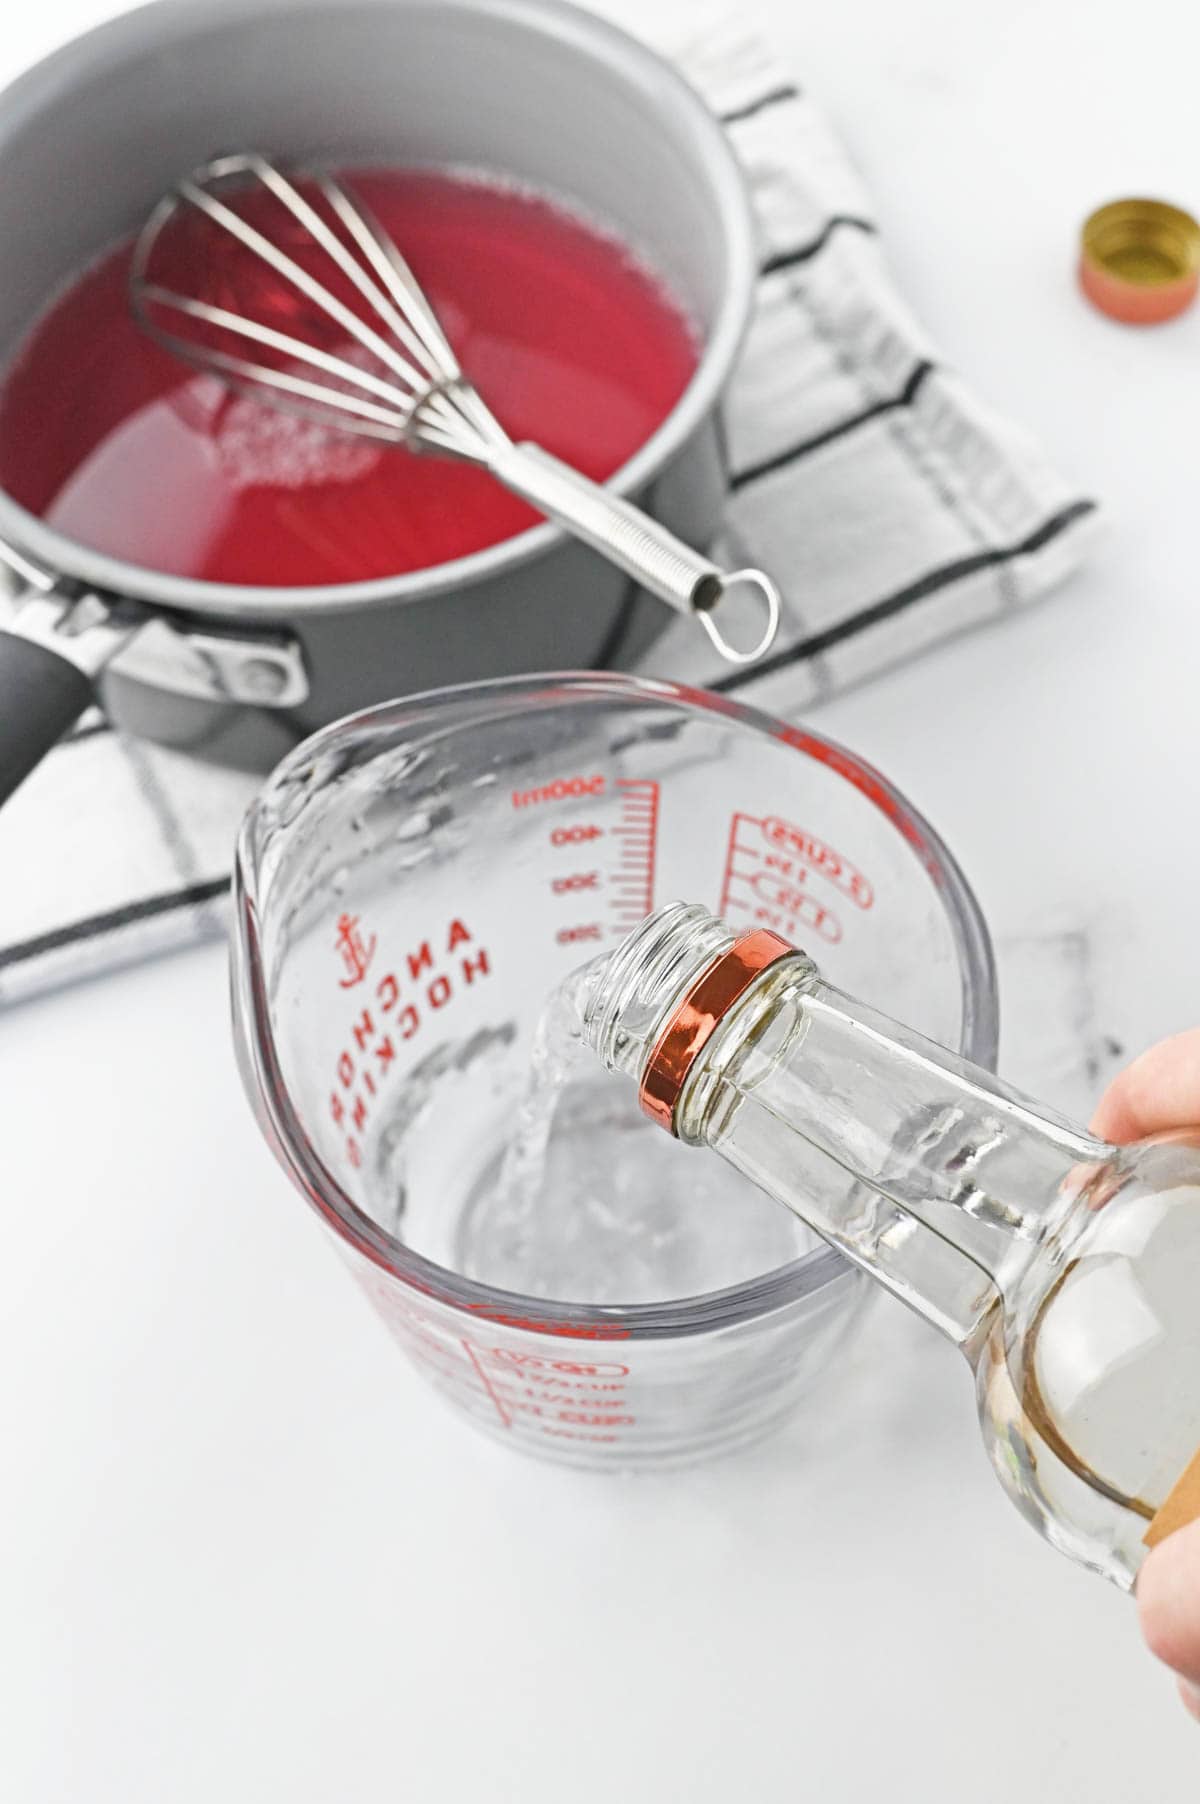 A person pouring clear liquid into a measuring cup.